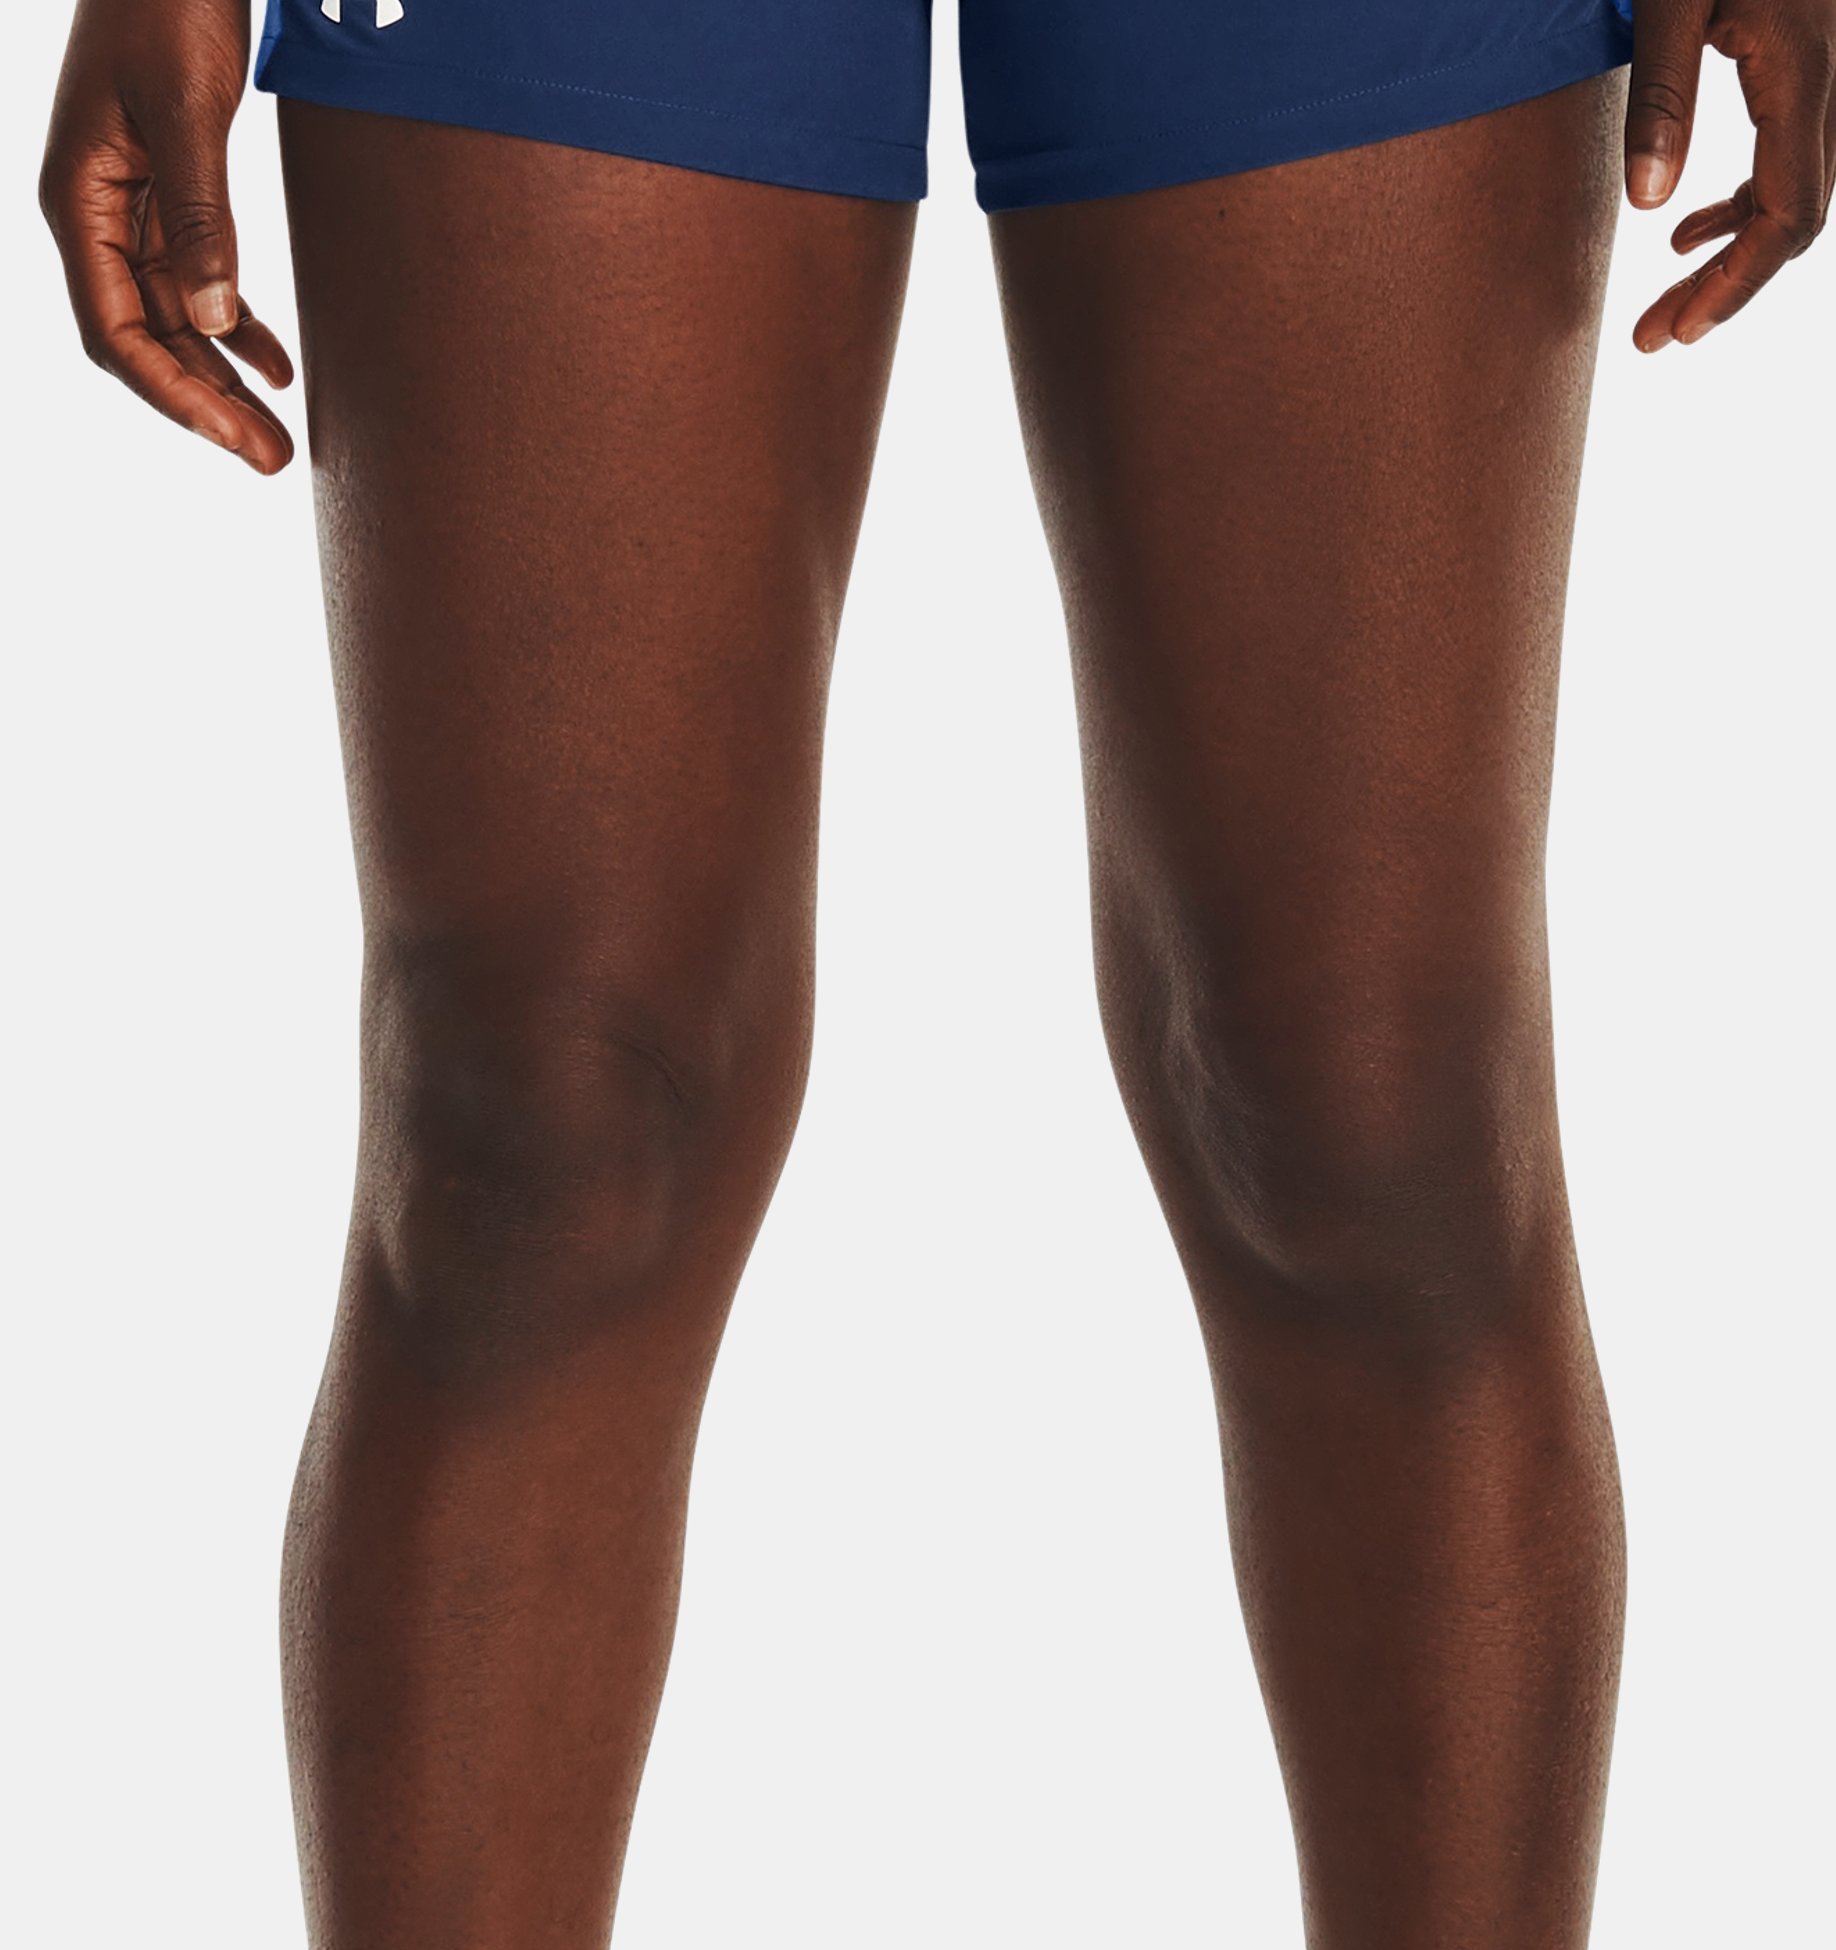 Buy Under Armour Qualifier Speedpocket 2-in-1 Short, Coral Dust  (642)/Reflective, X-Small at